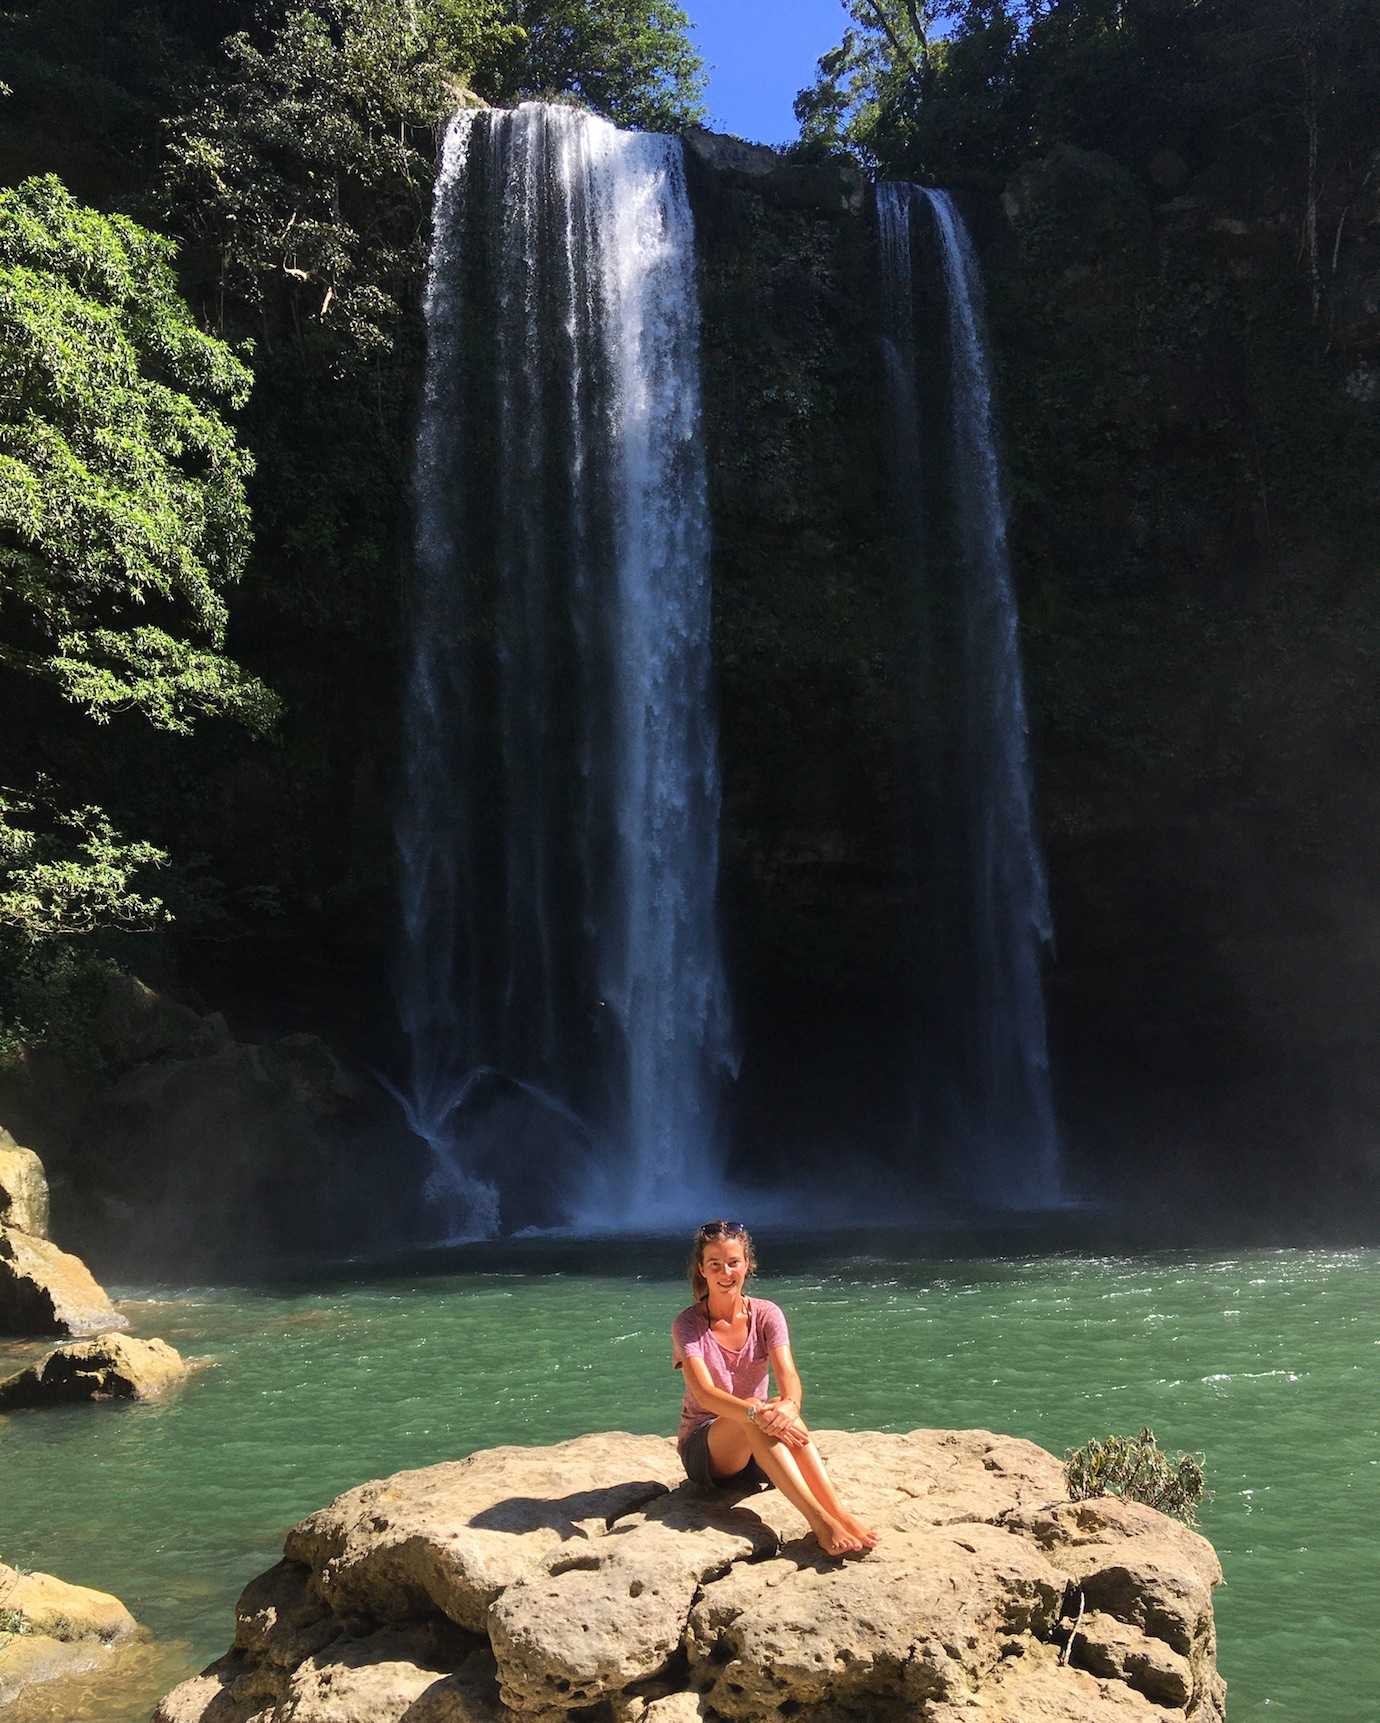 me misolha waterfall Palenque